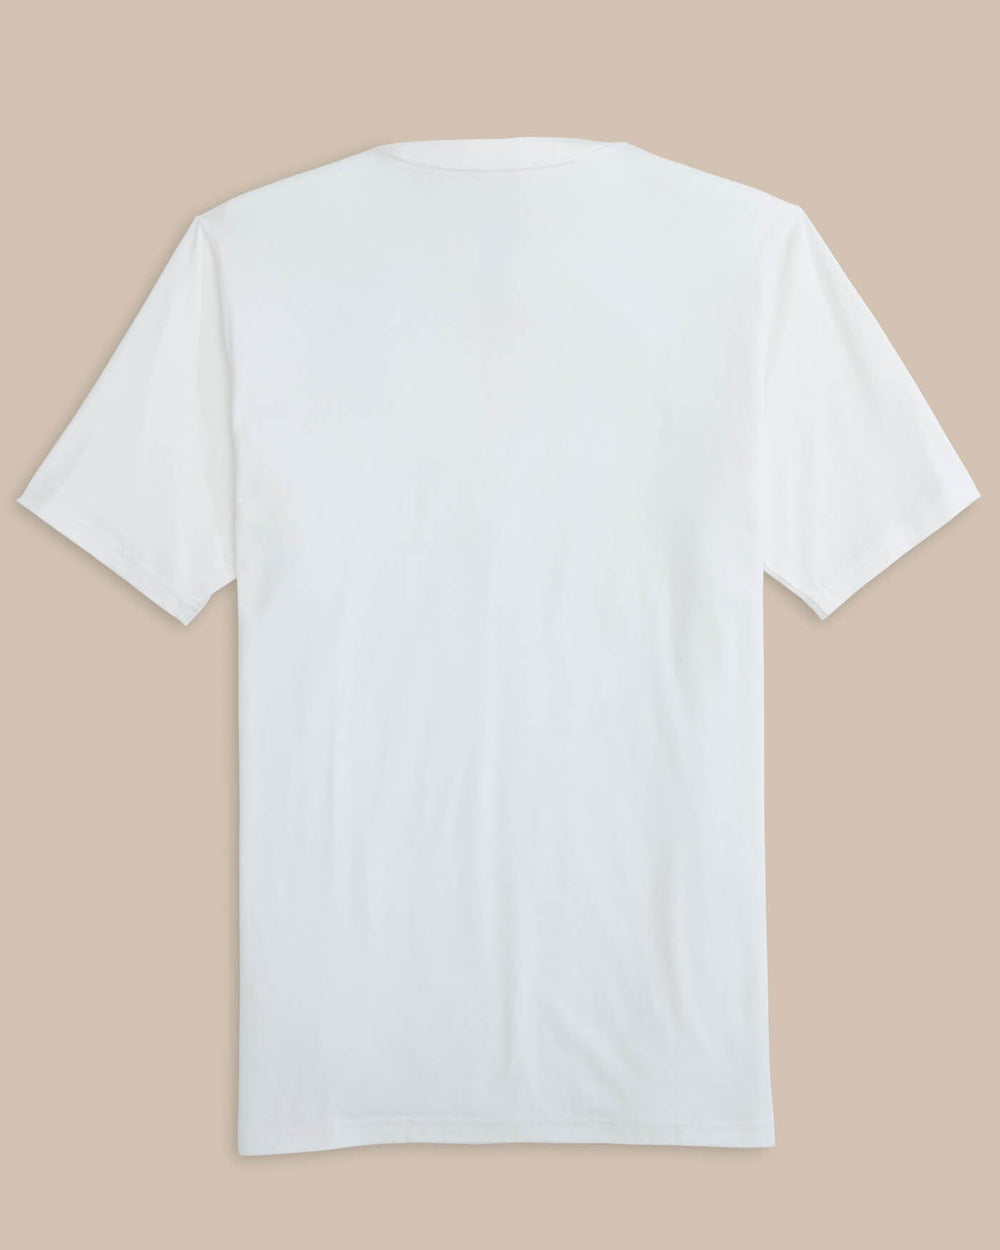 The back view of the Southern Tide The Seaport T-shirt by Southern Tide - Classic White